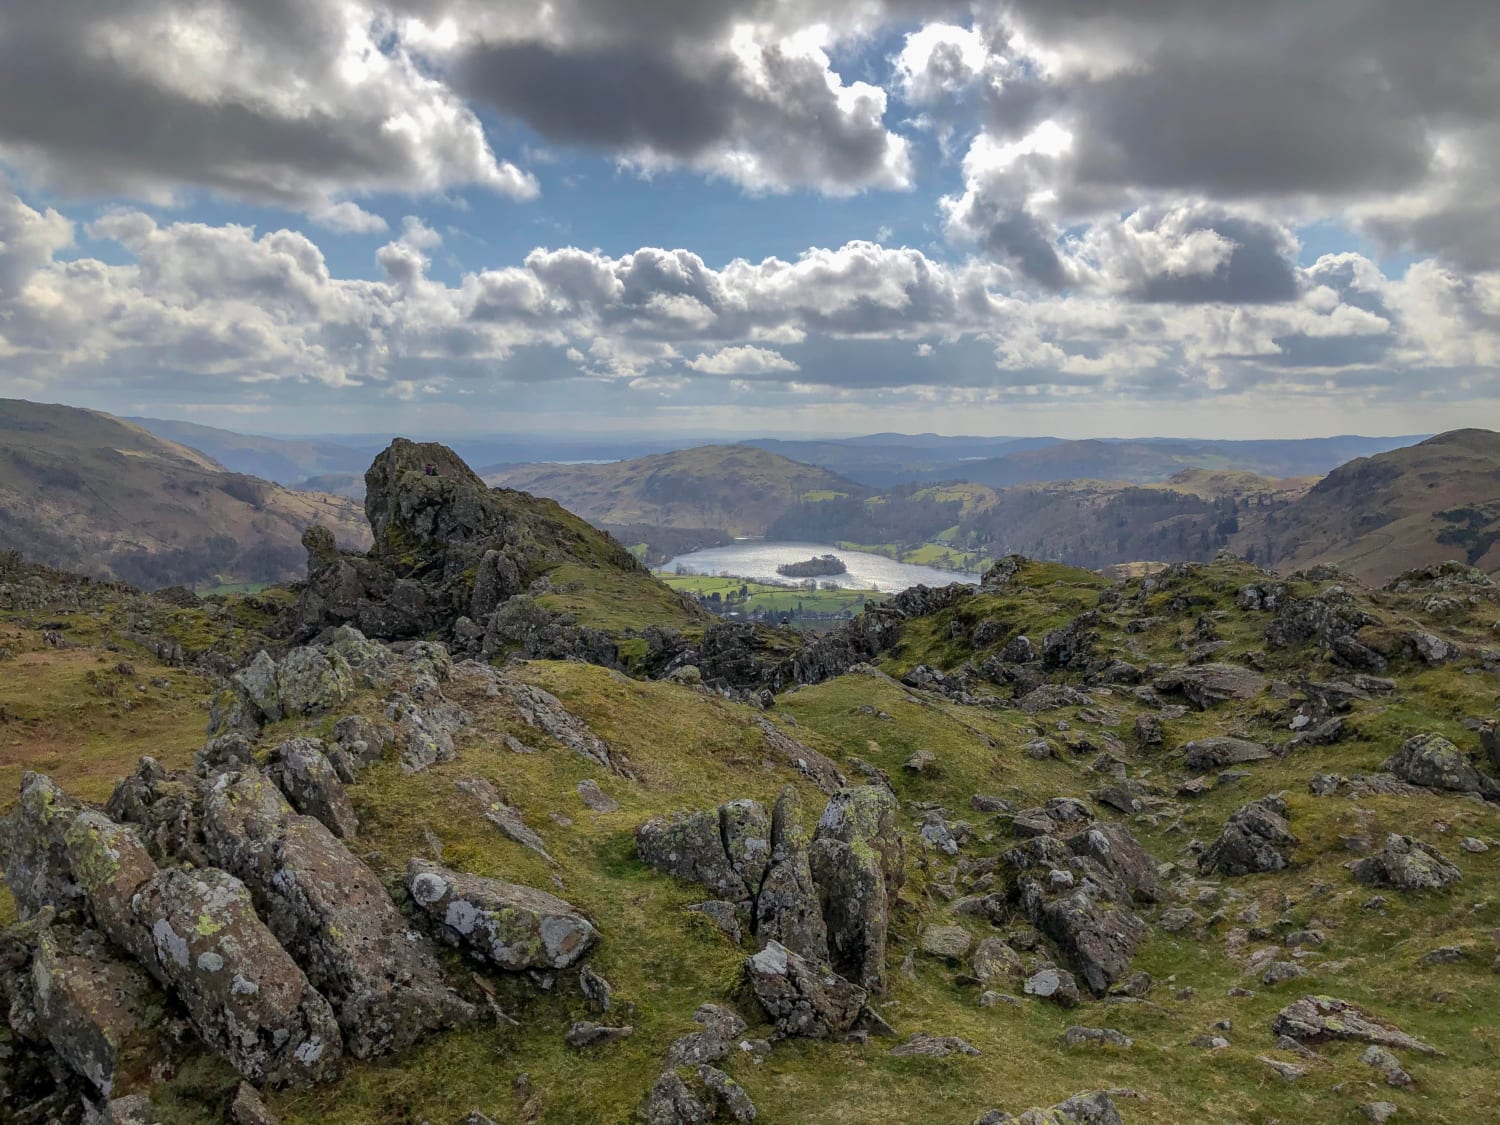 “The Lion and the Lamb”, Helm Crag, Lake District National Park, UK.